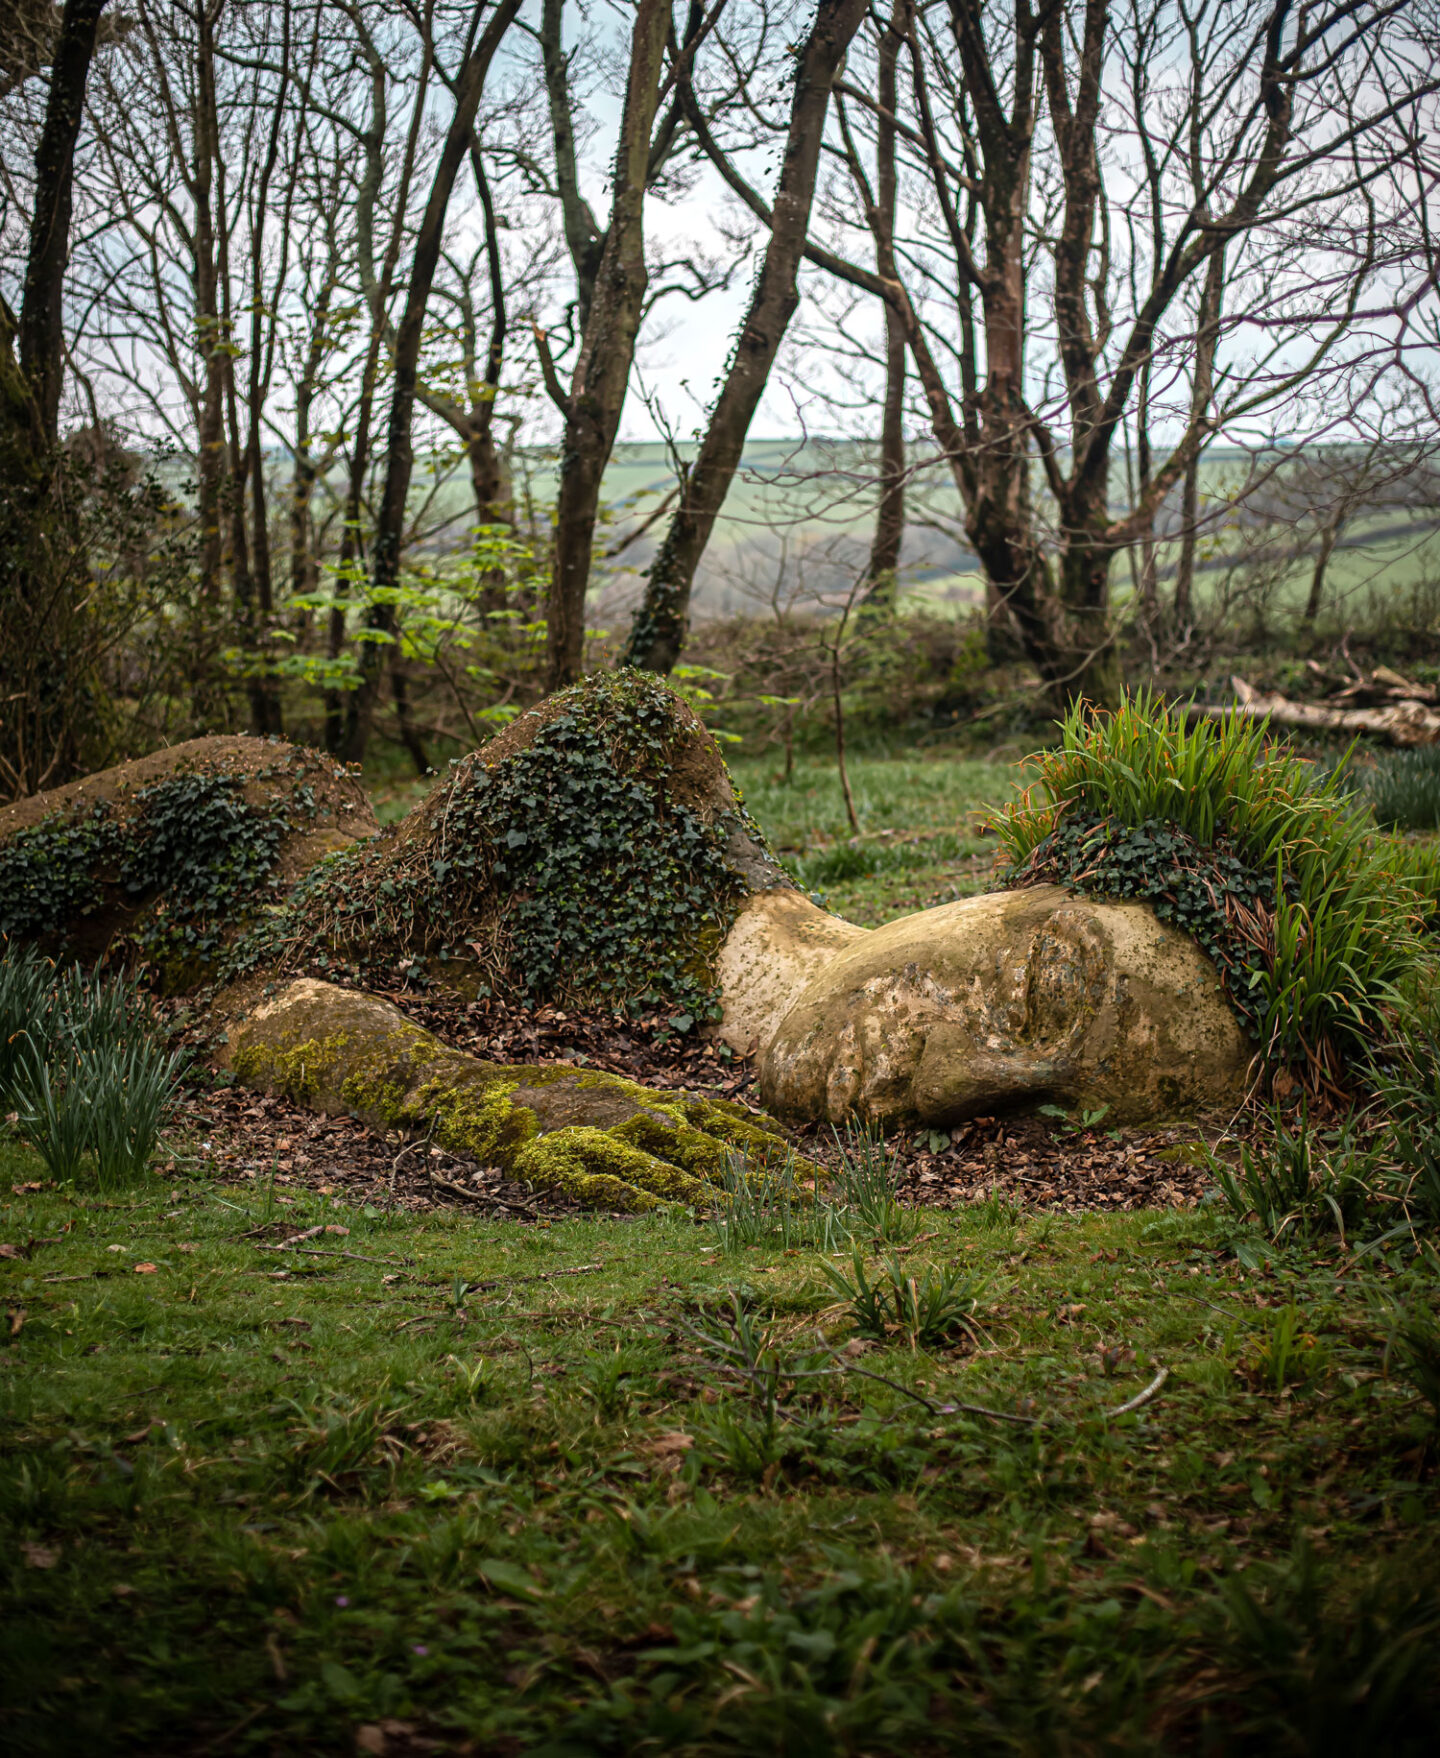 A whimsical sculpture of a reclining giant partially covered in moss and ivy, nestled among trees in a lush forest in Cornwall. The giant's face and hand are clearly visible, blending harmoniously with the surrounding natural landscape. The serene and magical setting evokes a sense of enchantment and curiosity.